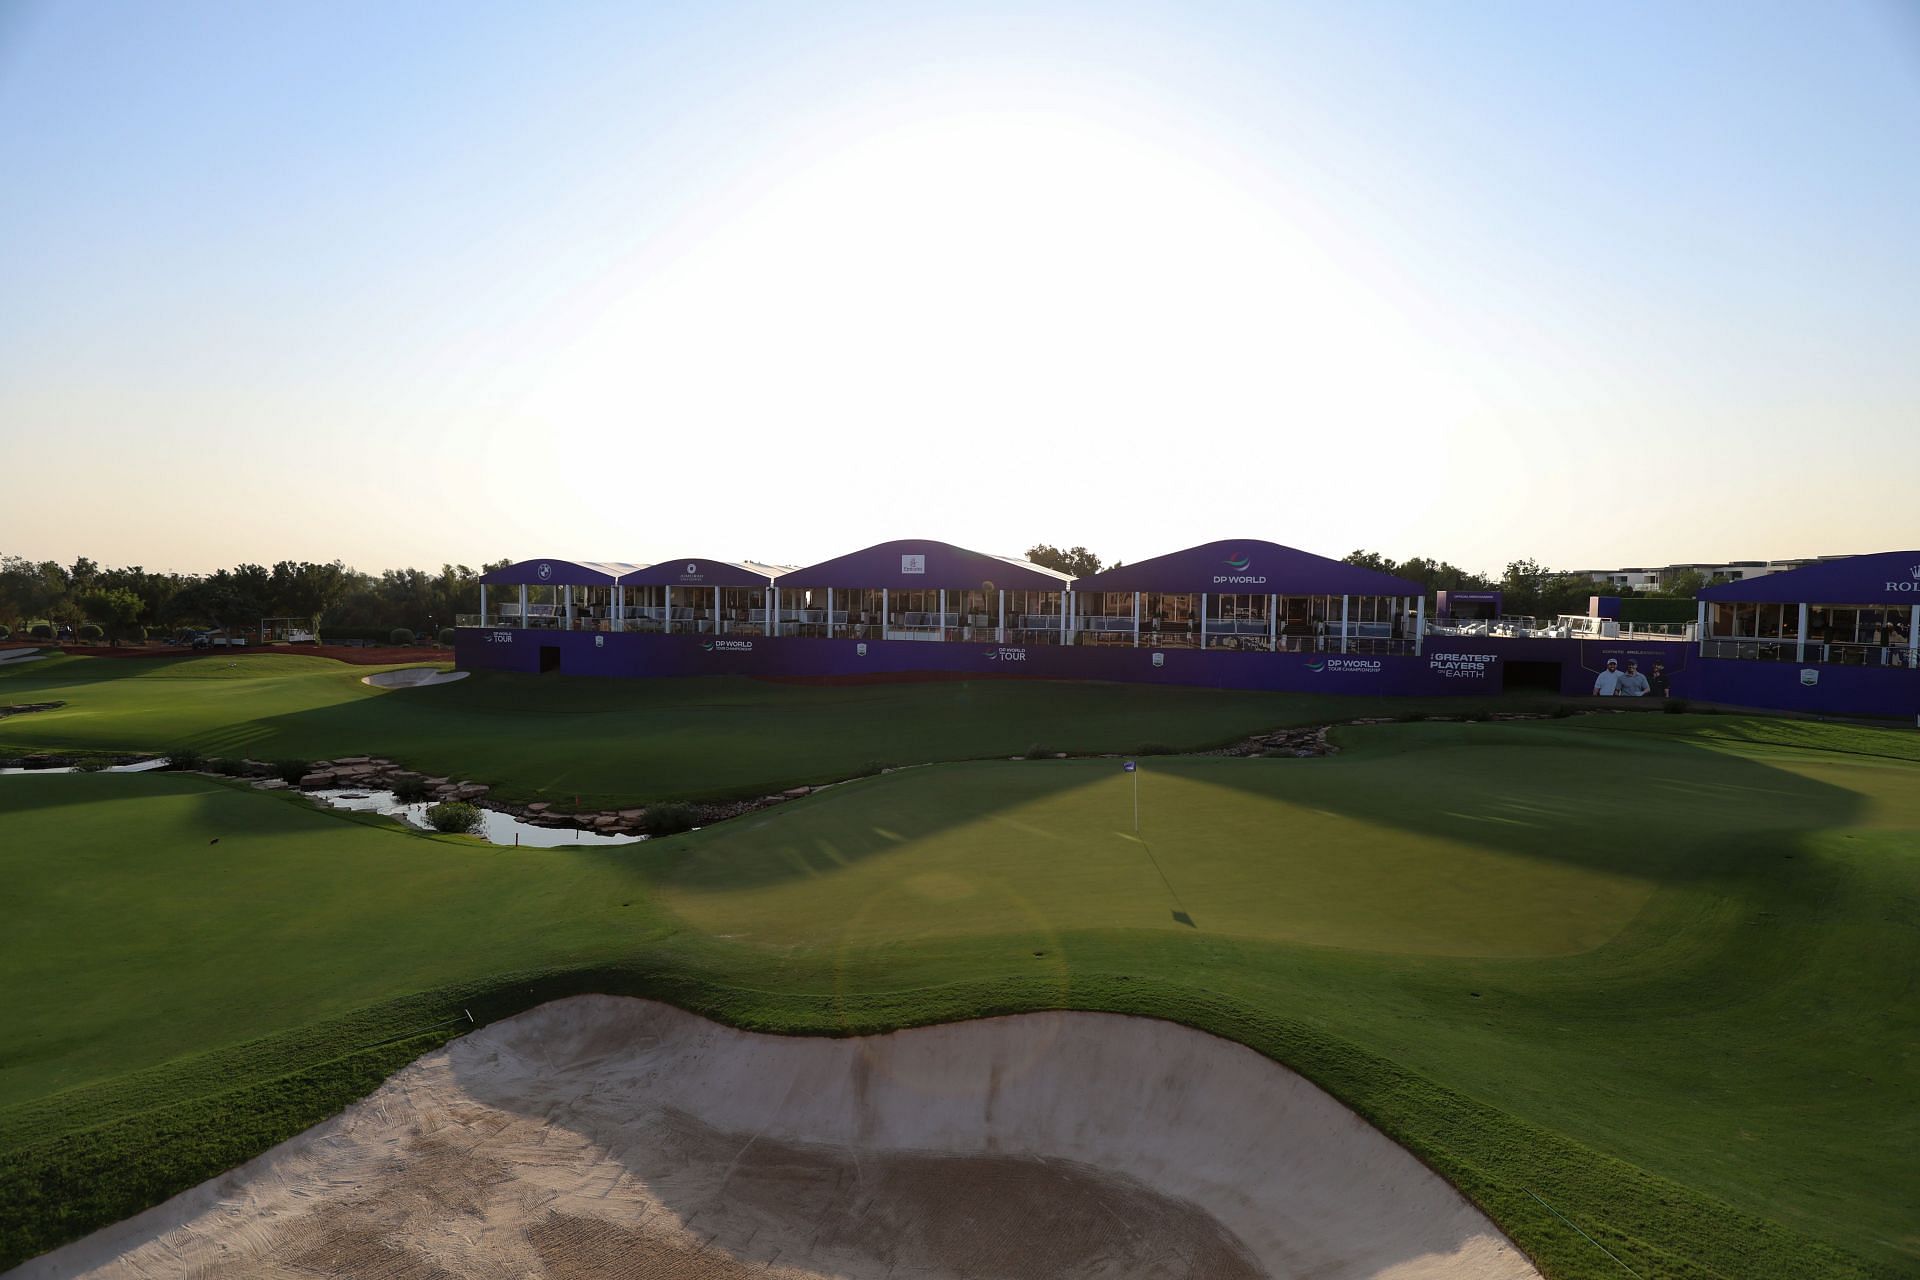 2022 DP World Tour Championship Tee times, where to watch and more